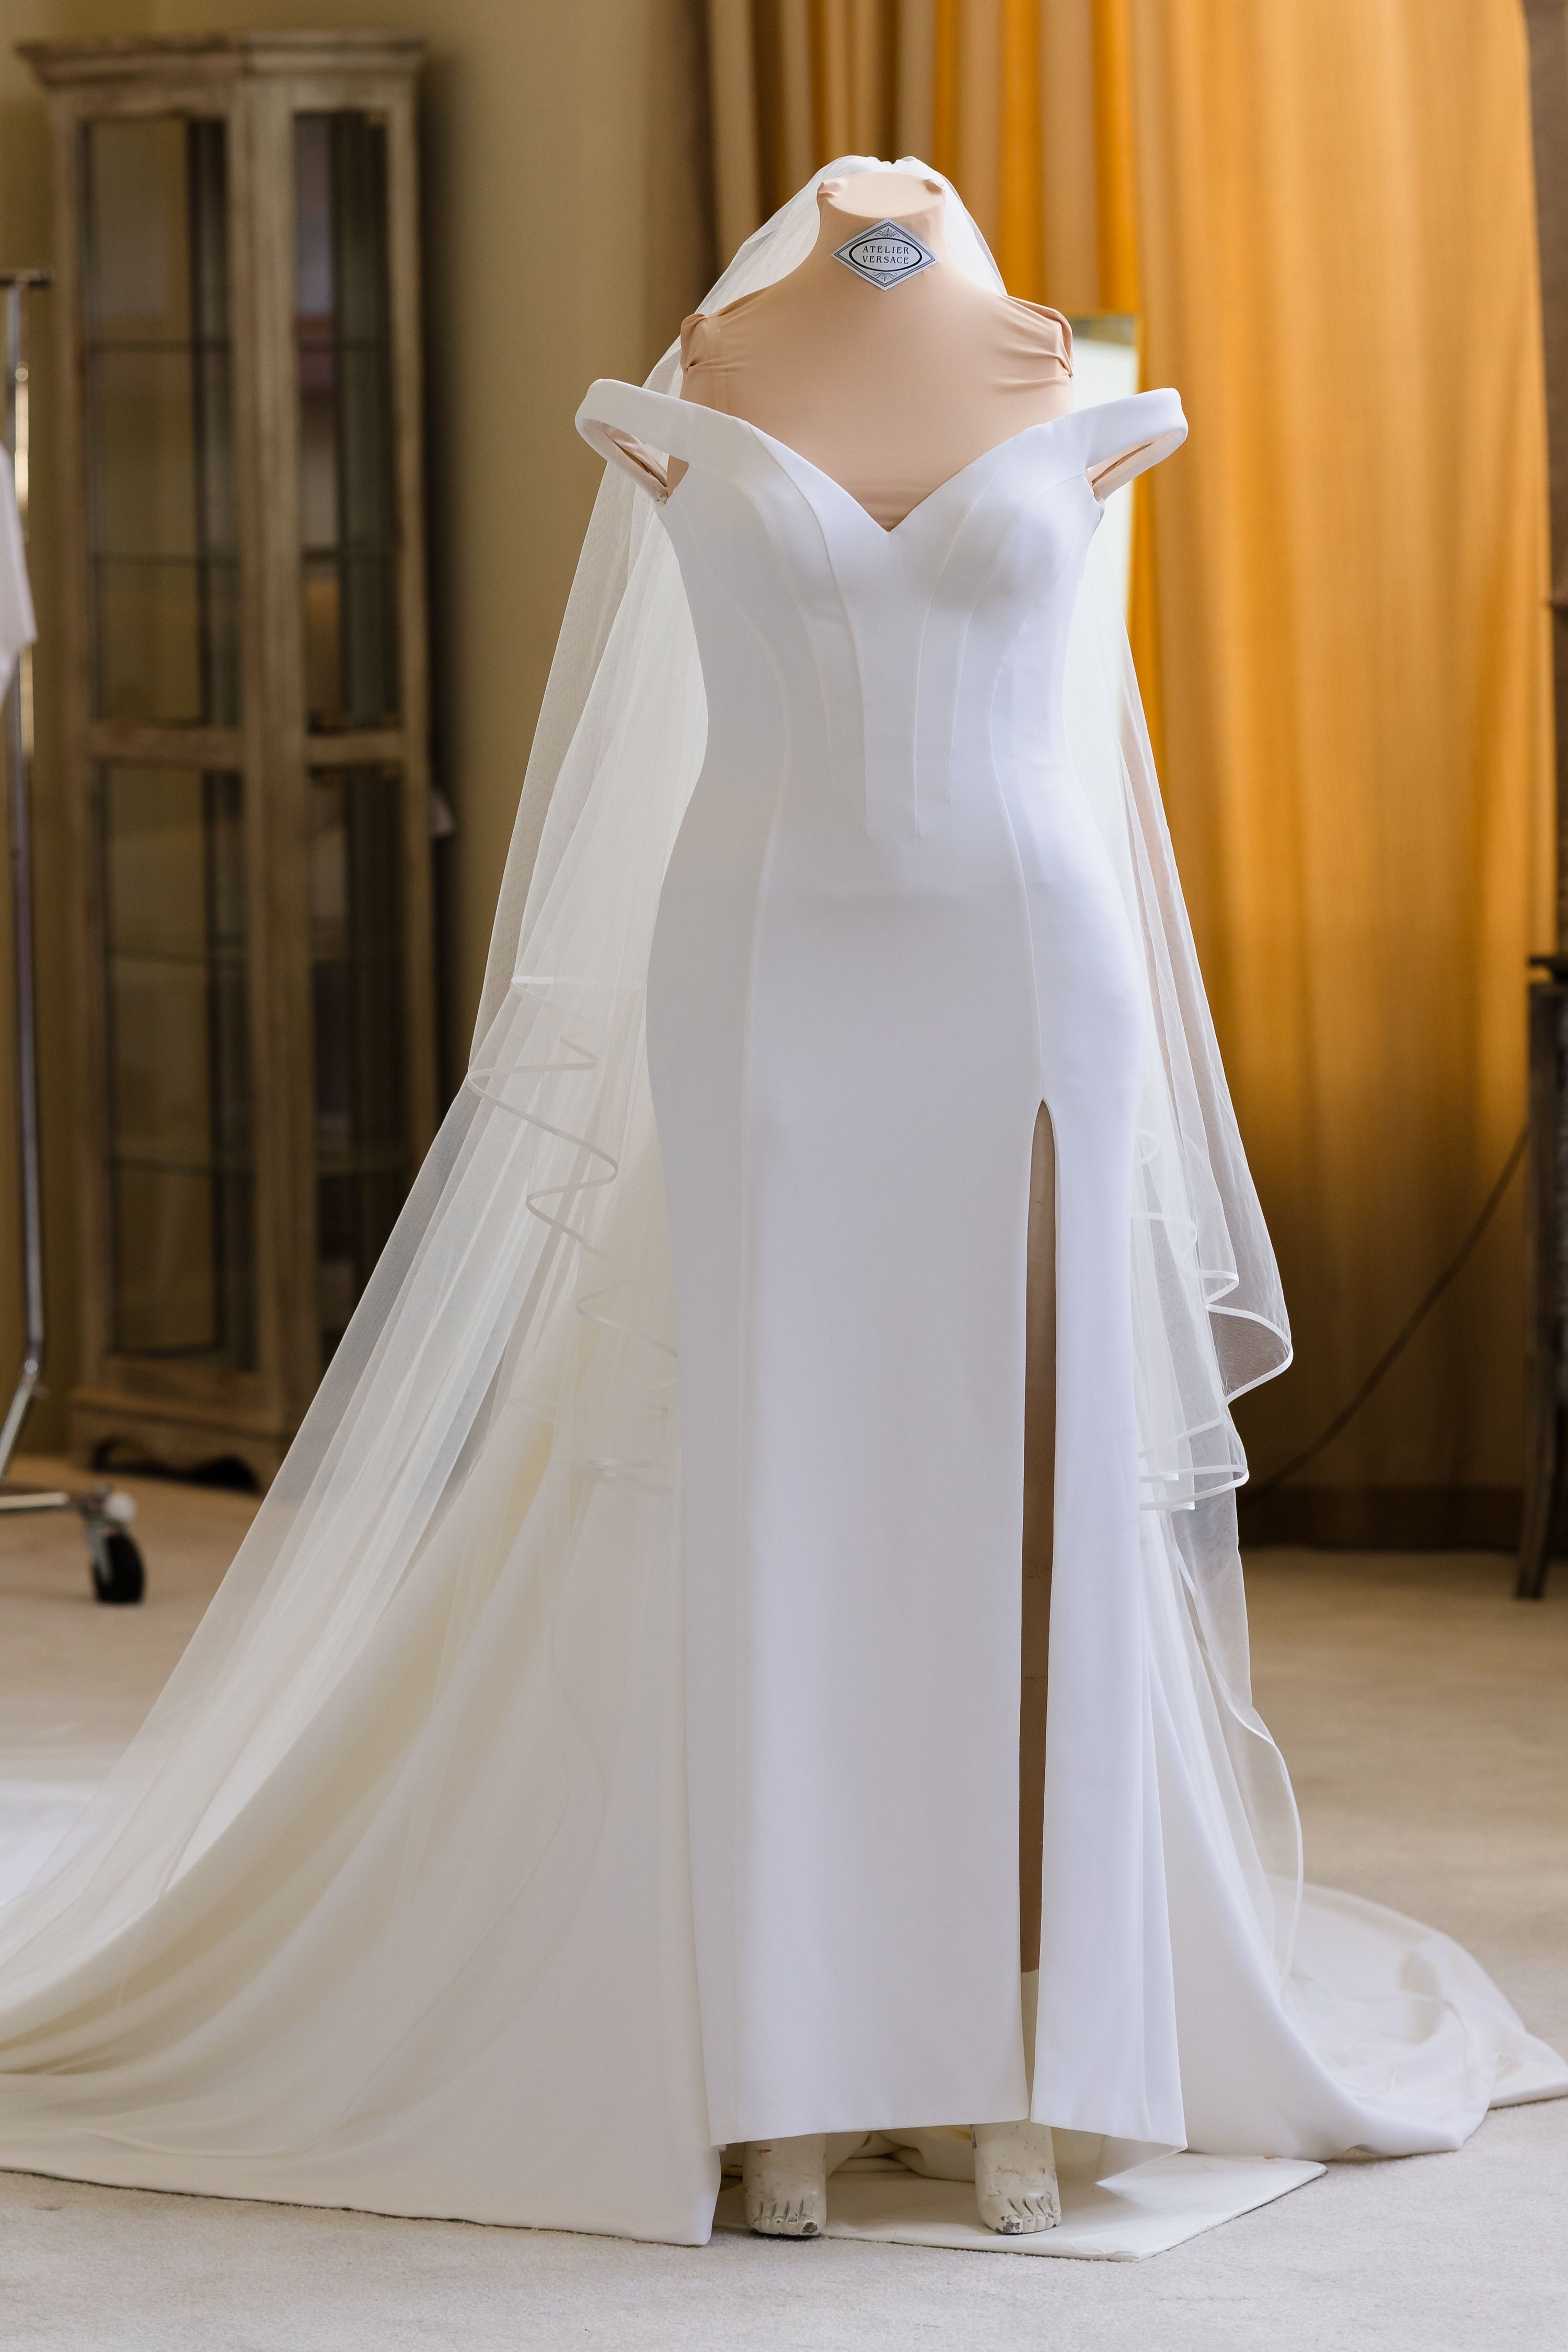 Wedding gown on a headless mannequin